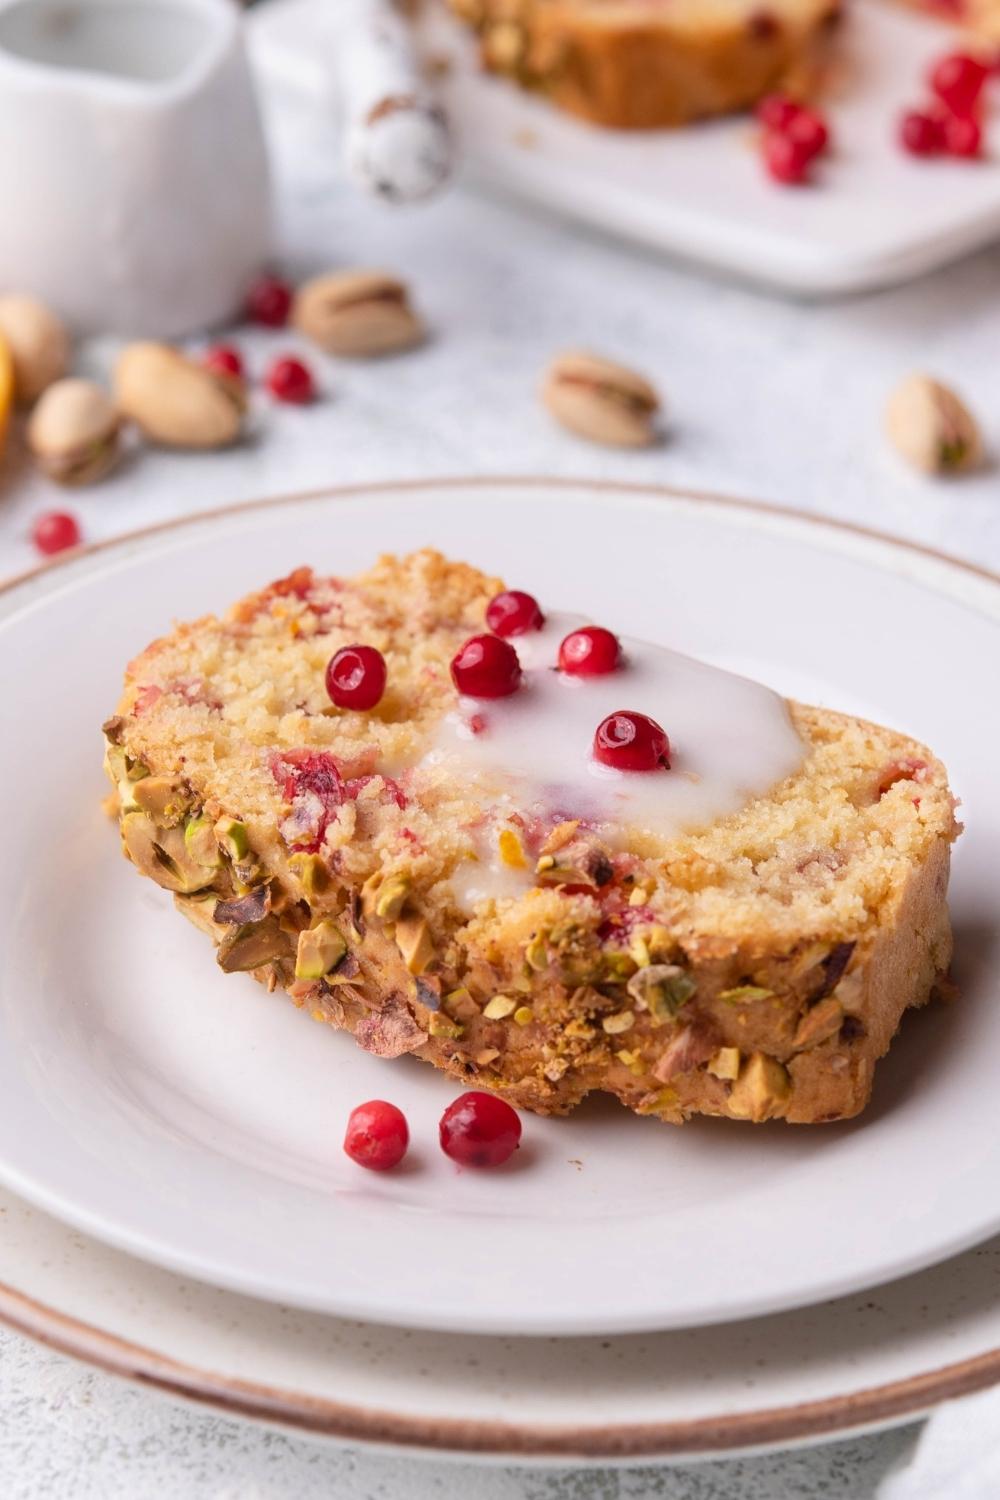 A slice of cranberry nut bread on a serving plate. It is glazed and has a few fresh cranberries to garnish.